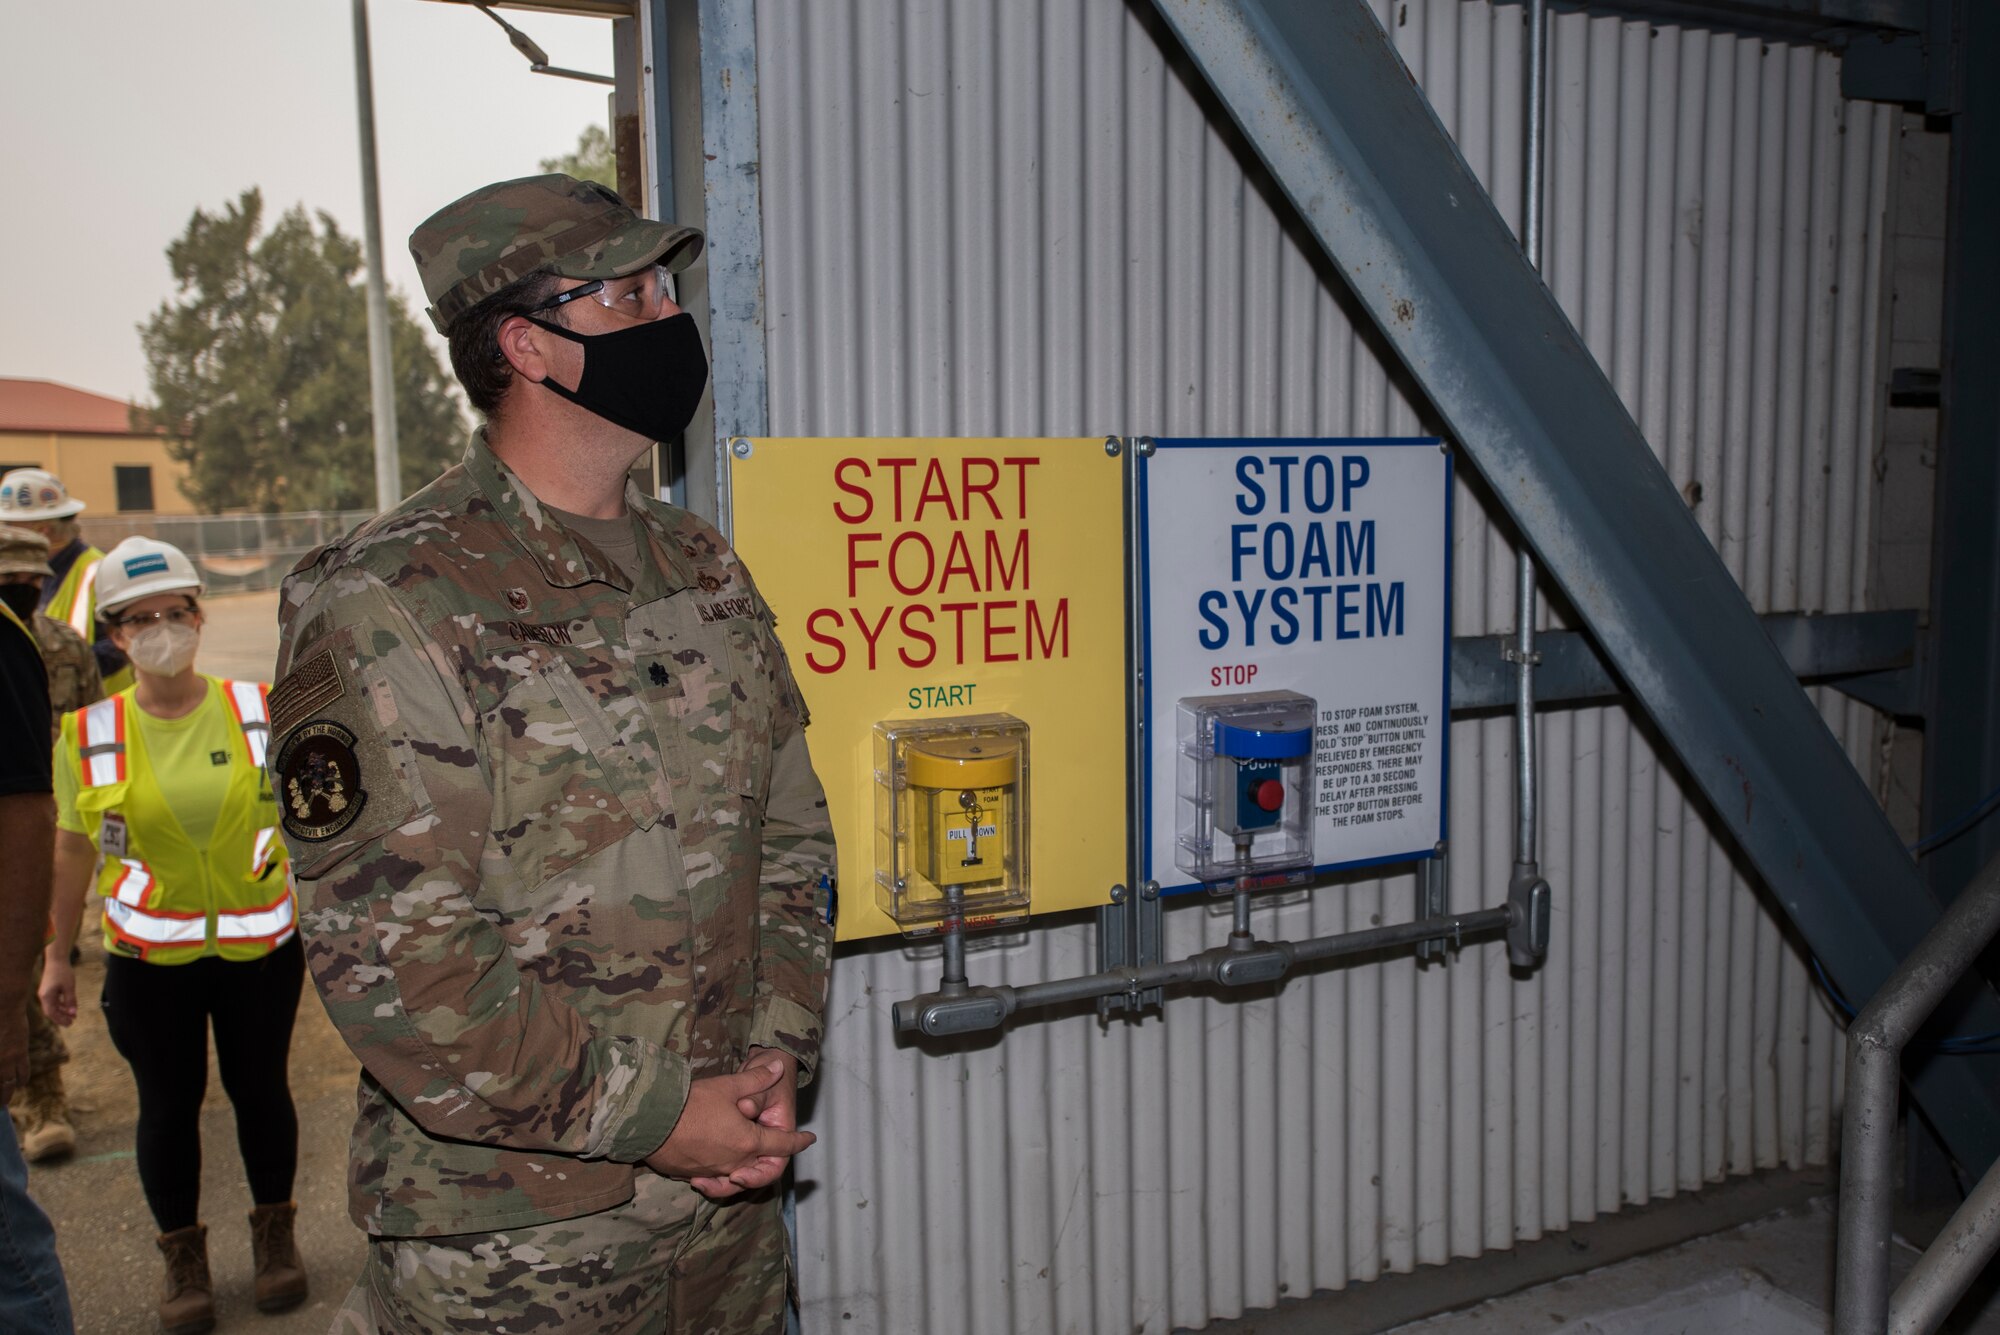 U.S. Air Force Lt. Col. Glenn Cameron, 60th Civil Engineering Squadron commander, waits for the countdown to trip the high expansion foam fire suppression system for a system test Sept. 11, 2020, at Travis Air Force Base, California. The system is used to extinguish fires inside aircraft hangars to protect Airmen and Air Force assets. (U.S. Air Force photo by Senior Airman Cameron Otte)